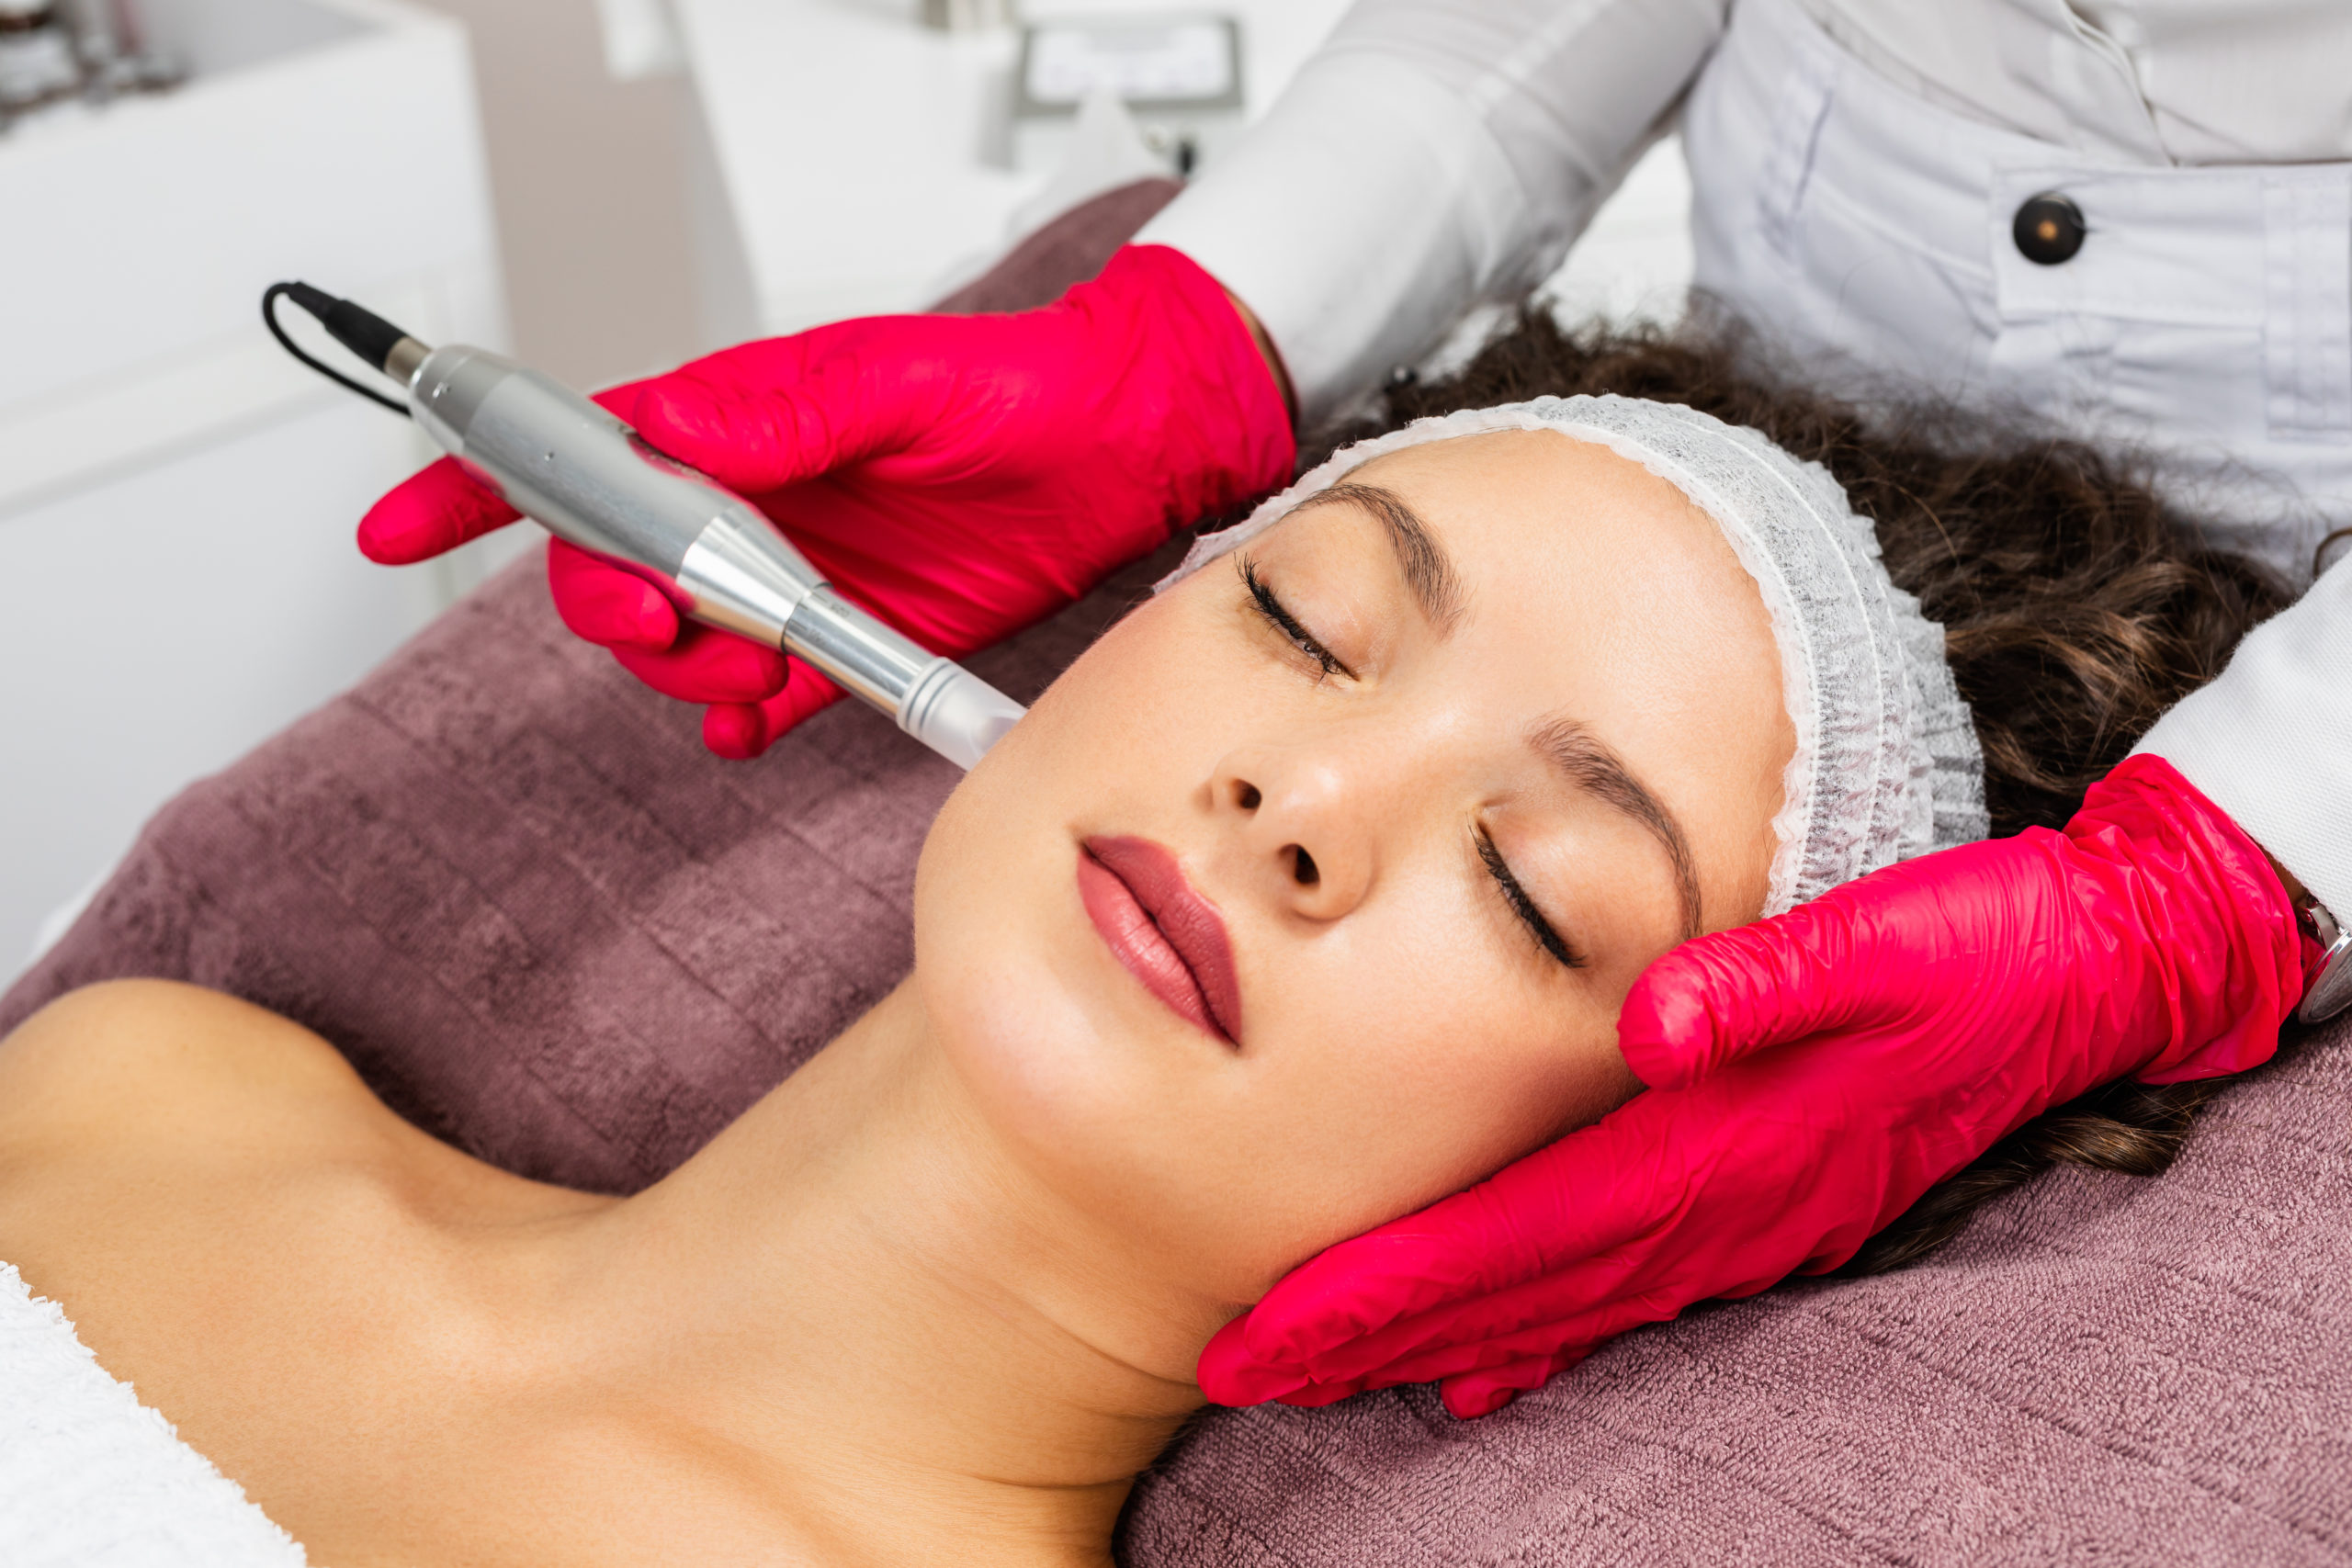 Microneedling With PRP Benefits, Side Effects, And More